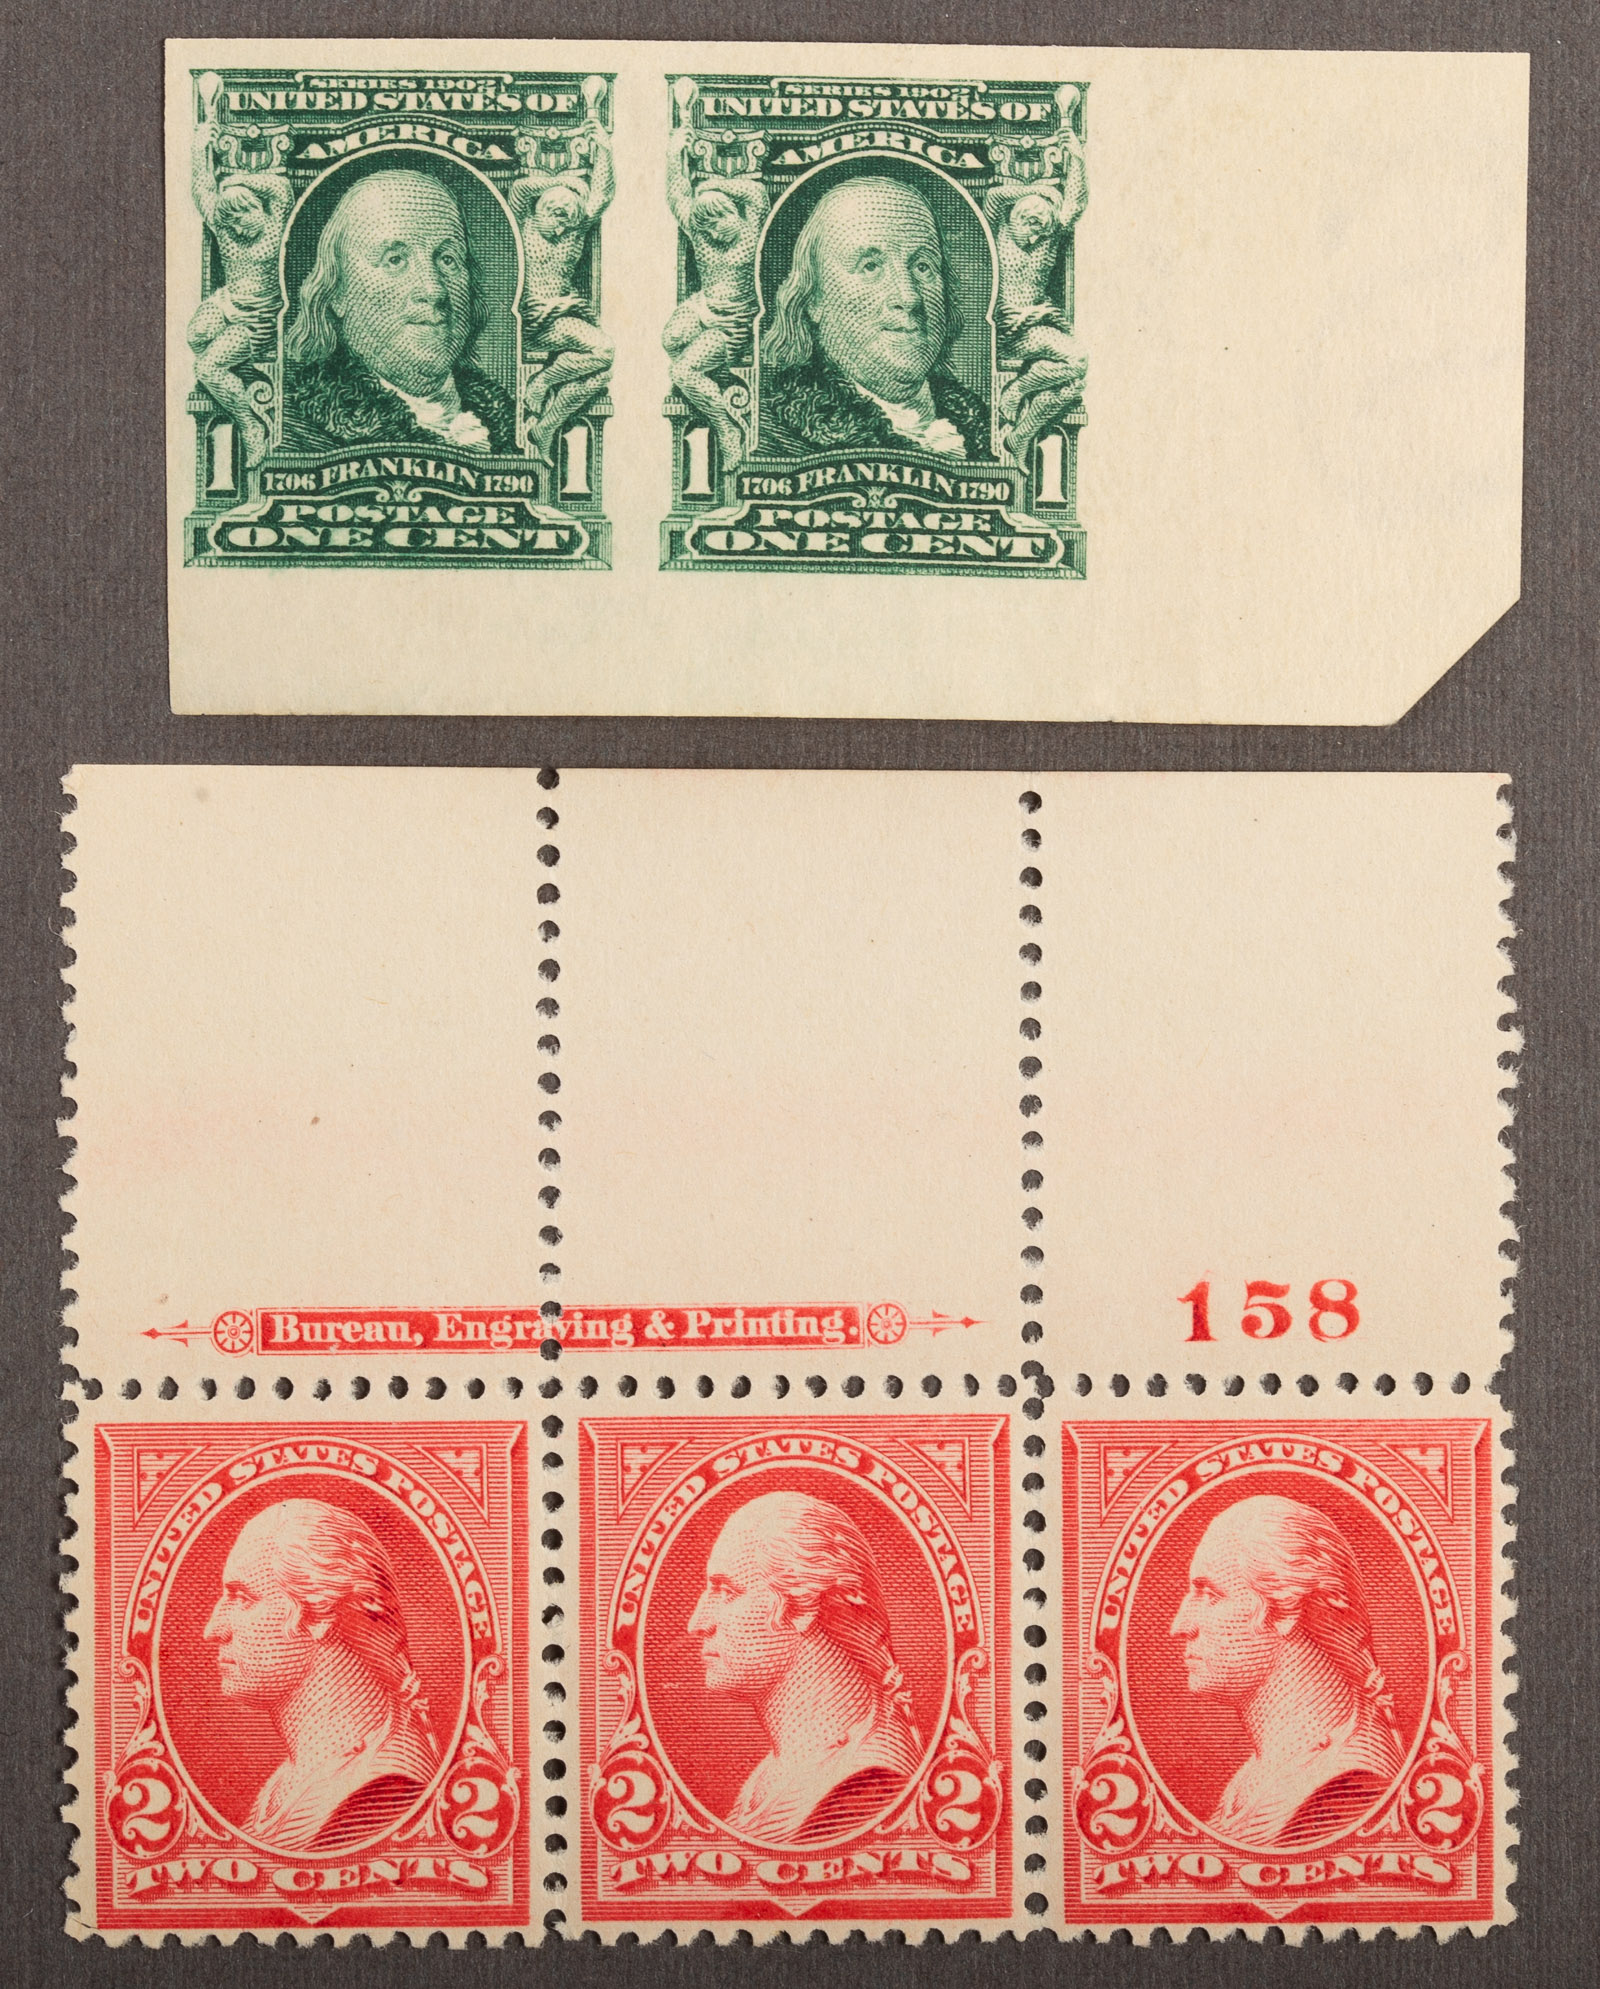 GROUP OF U S POSTAGE STAMPS 1895 3389f6